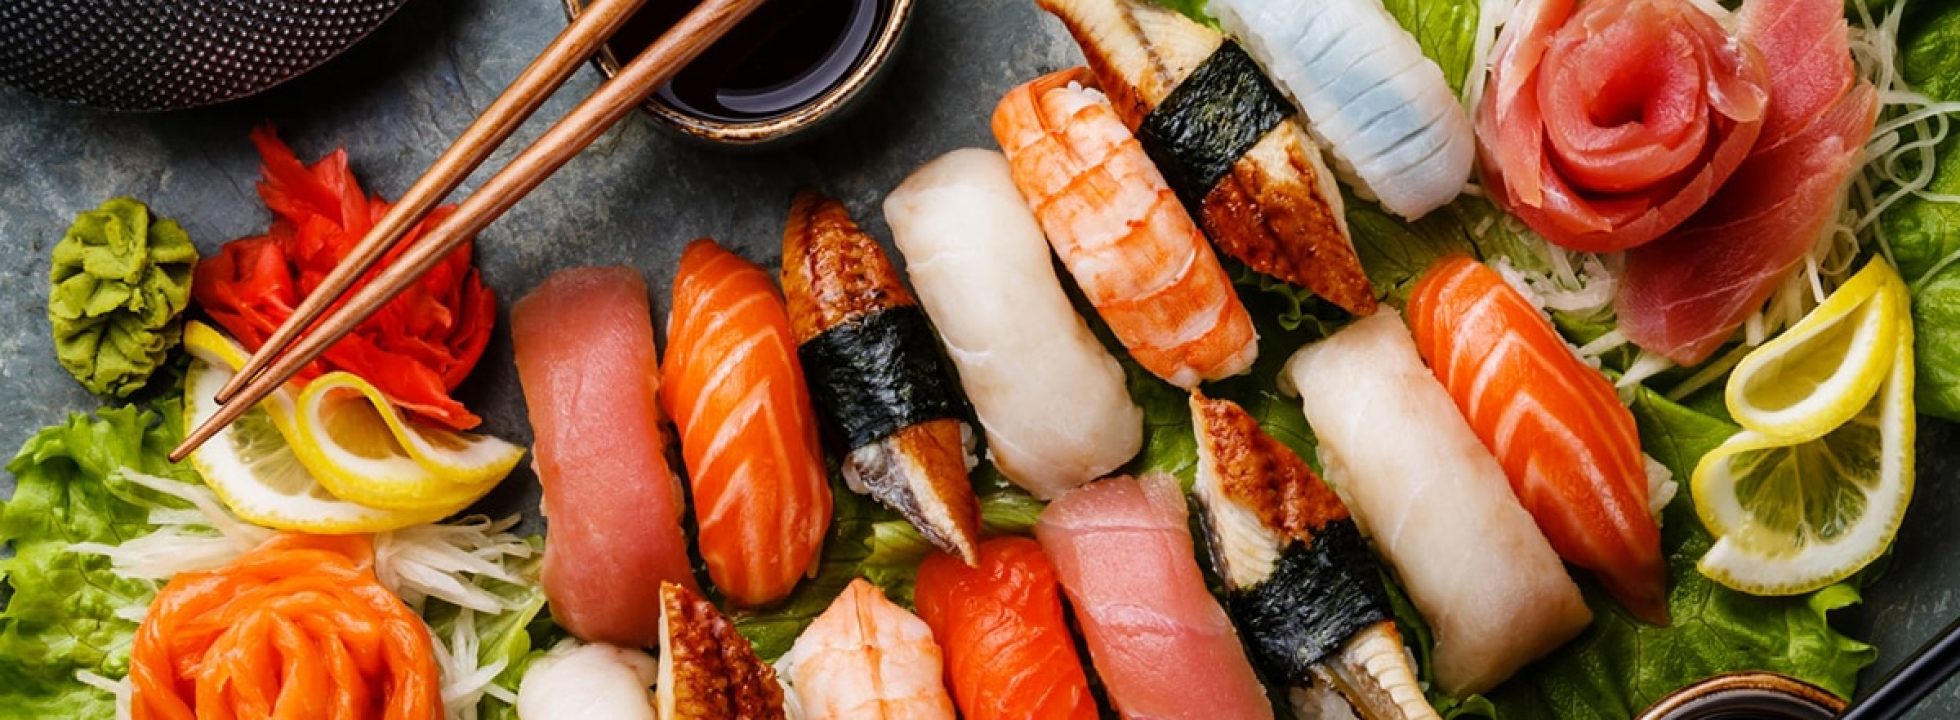 21-Best-Japanese-and-Sushi-Restaurants-in-Perth-1200x800